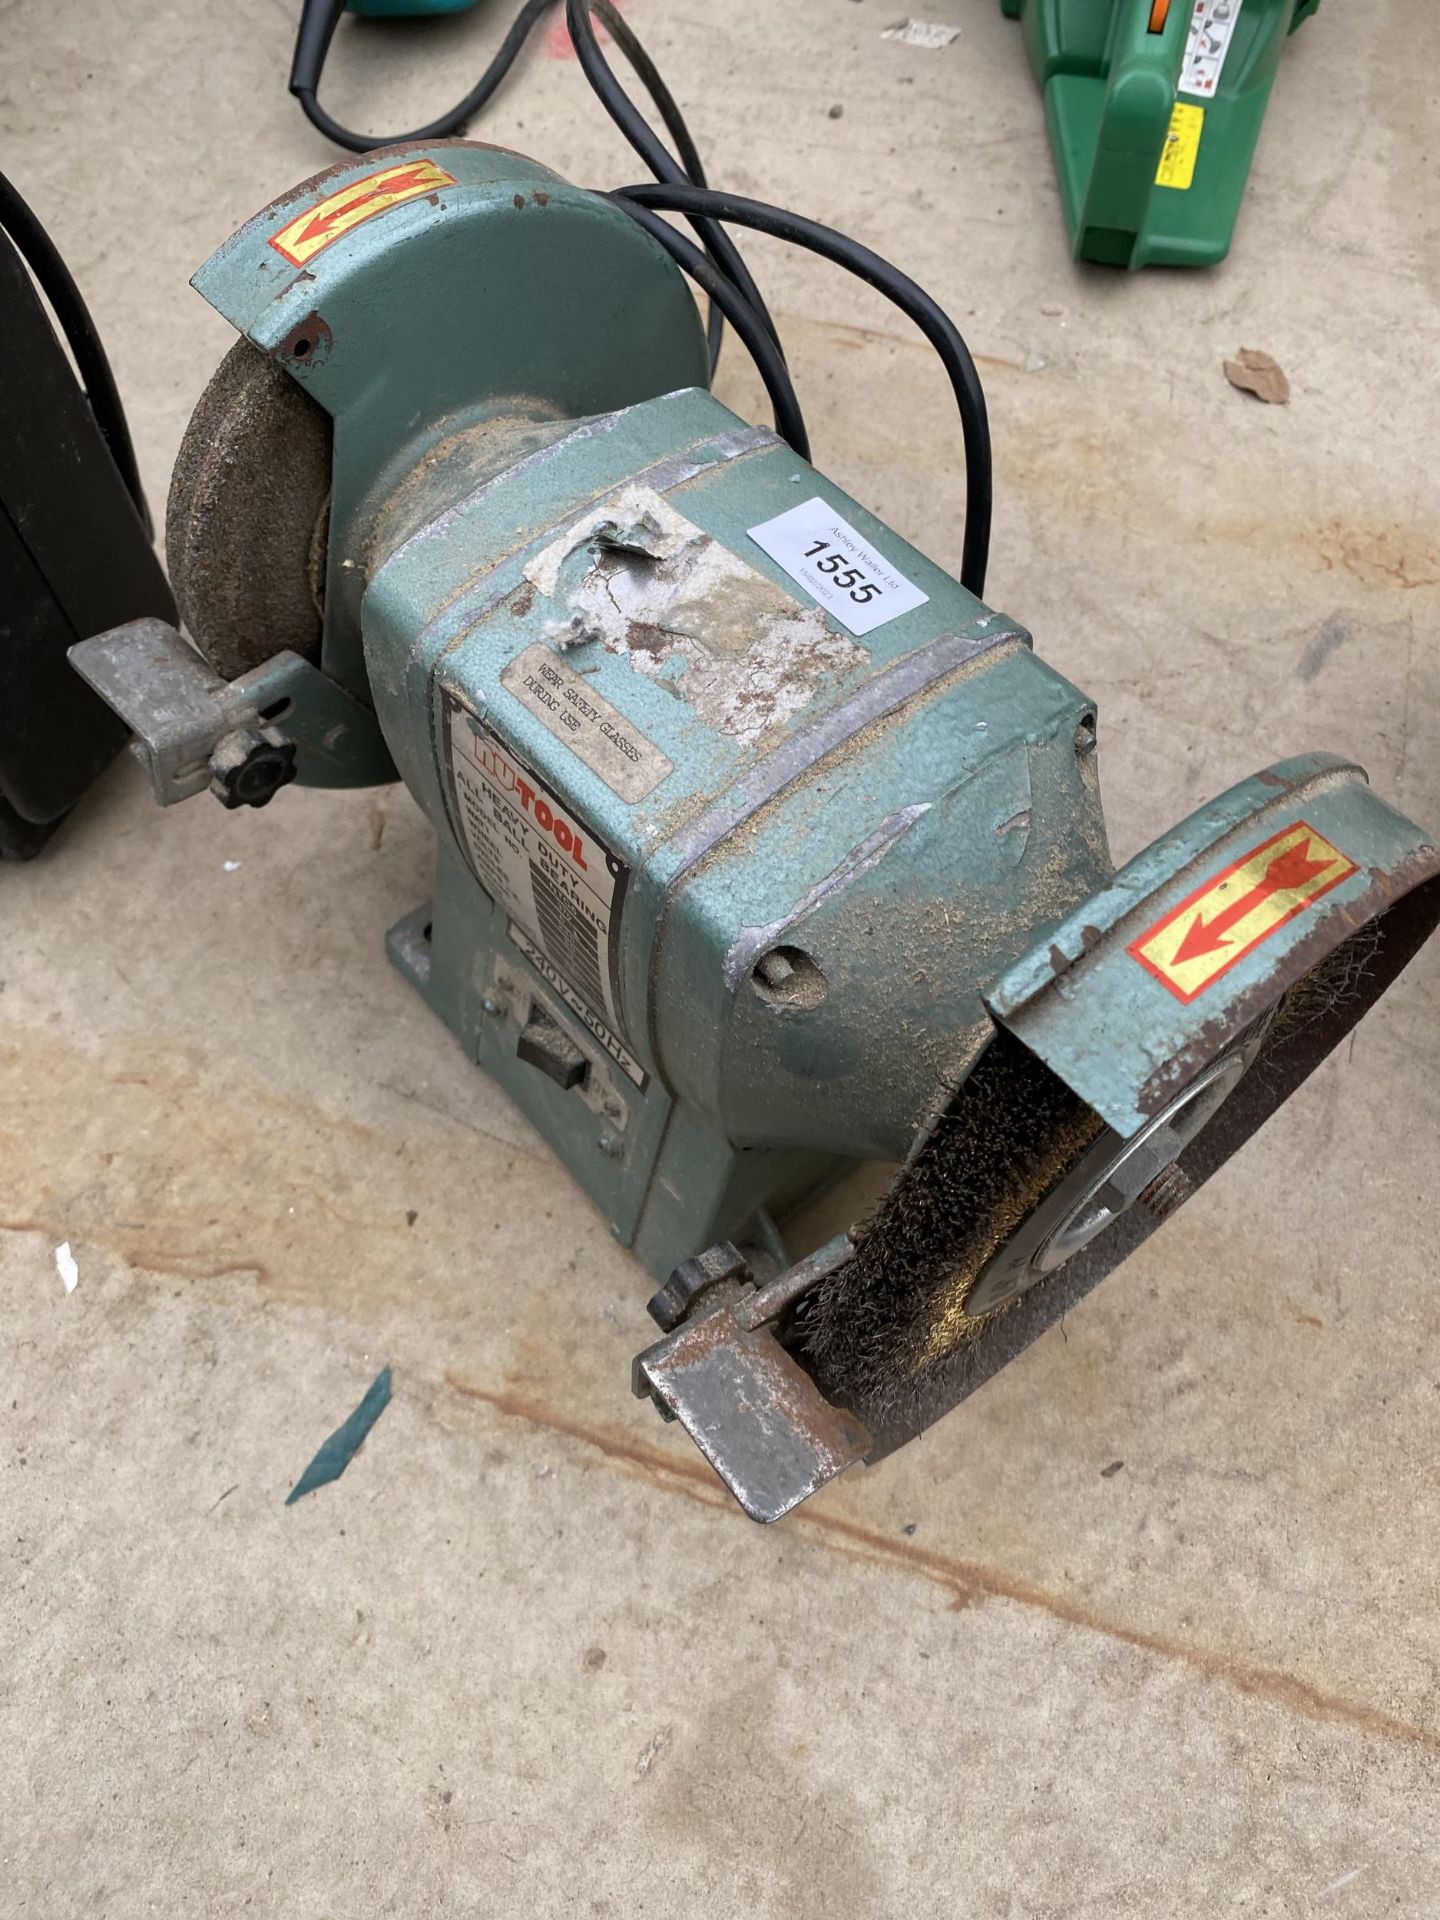 A NUTOOL ELECTRIC BENCH GRINDER